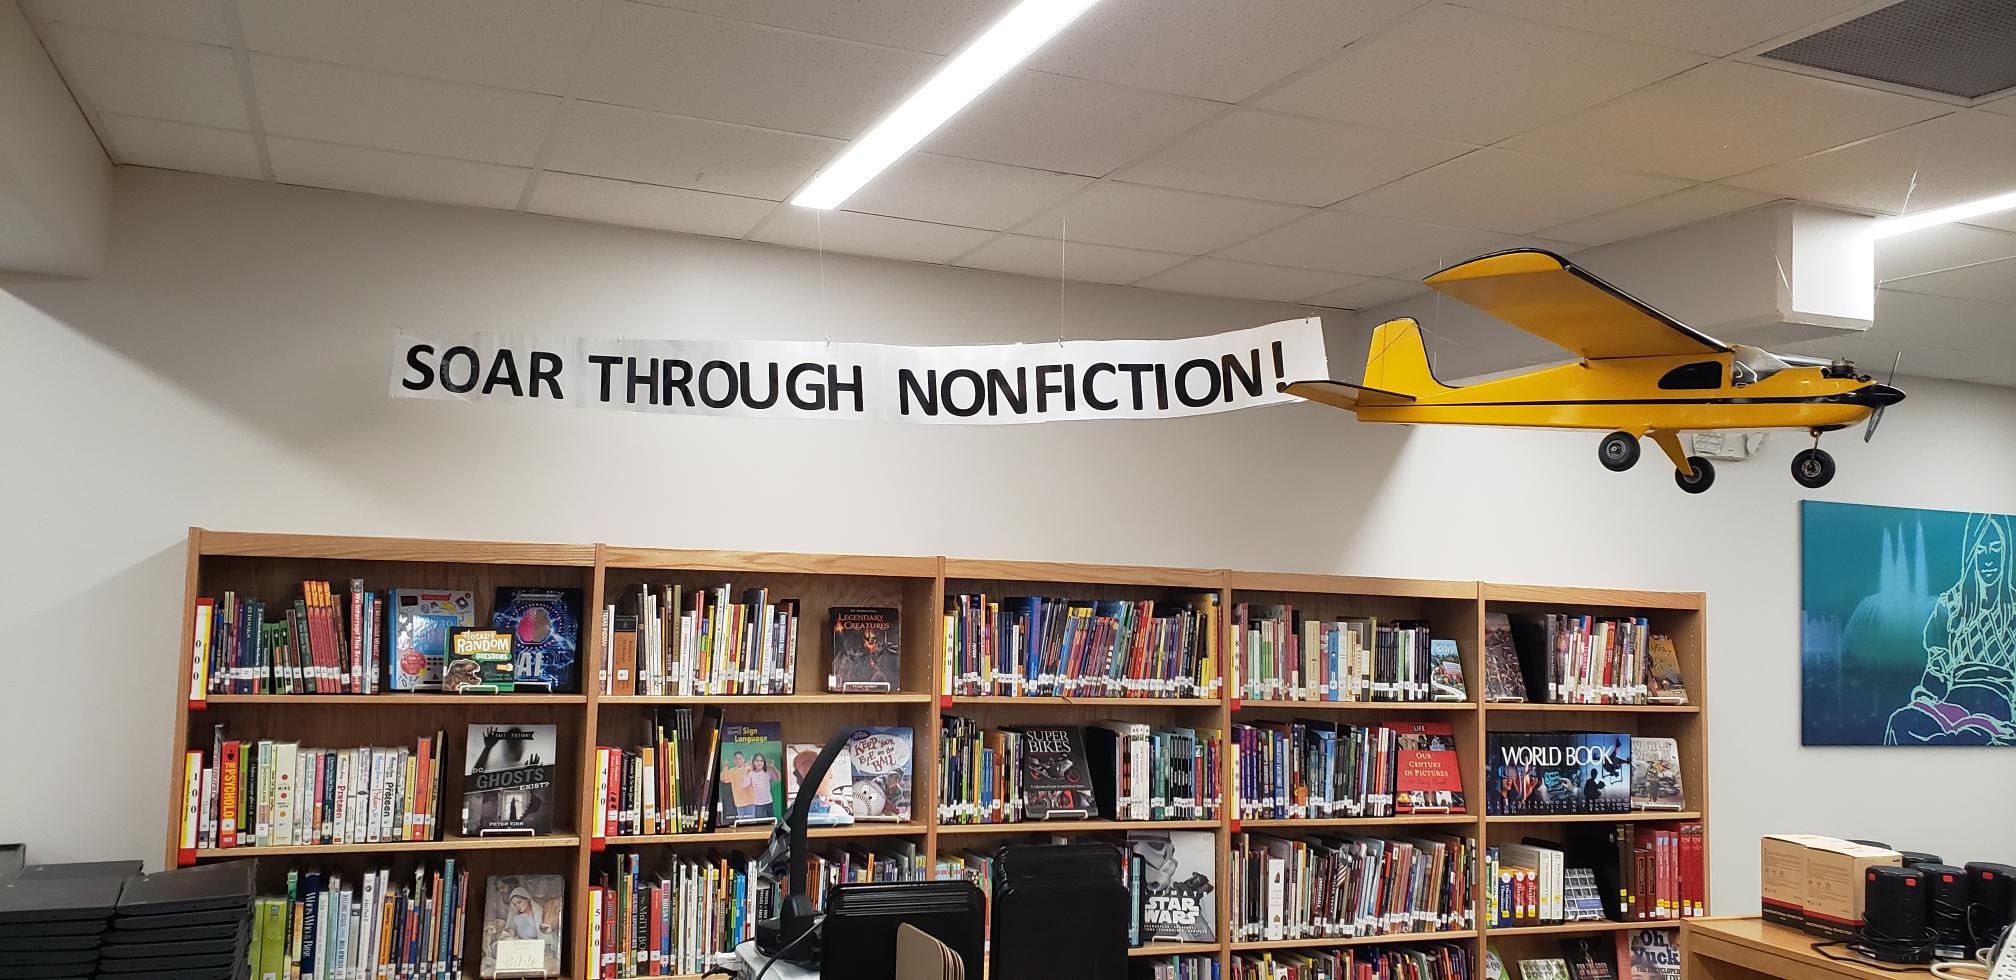 books with an airplane and tail tag that says Soar Through Nonfiction!